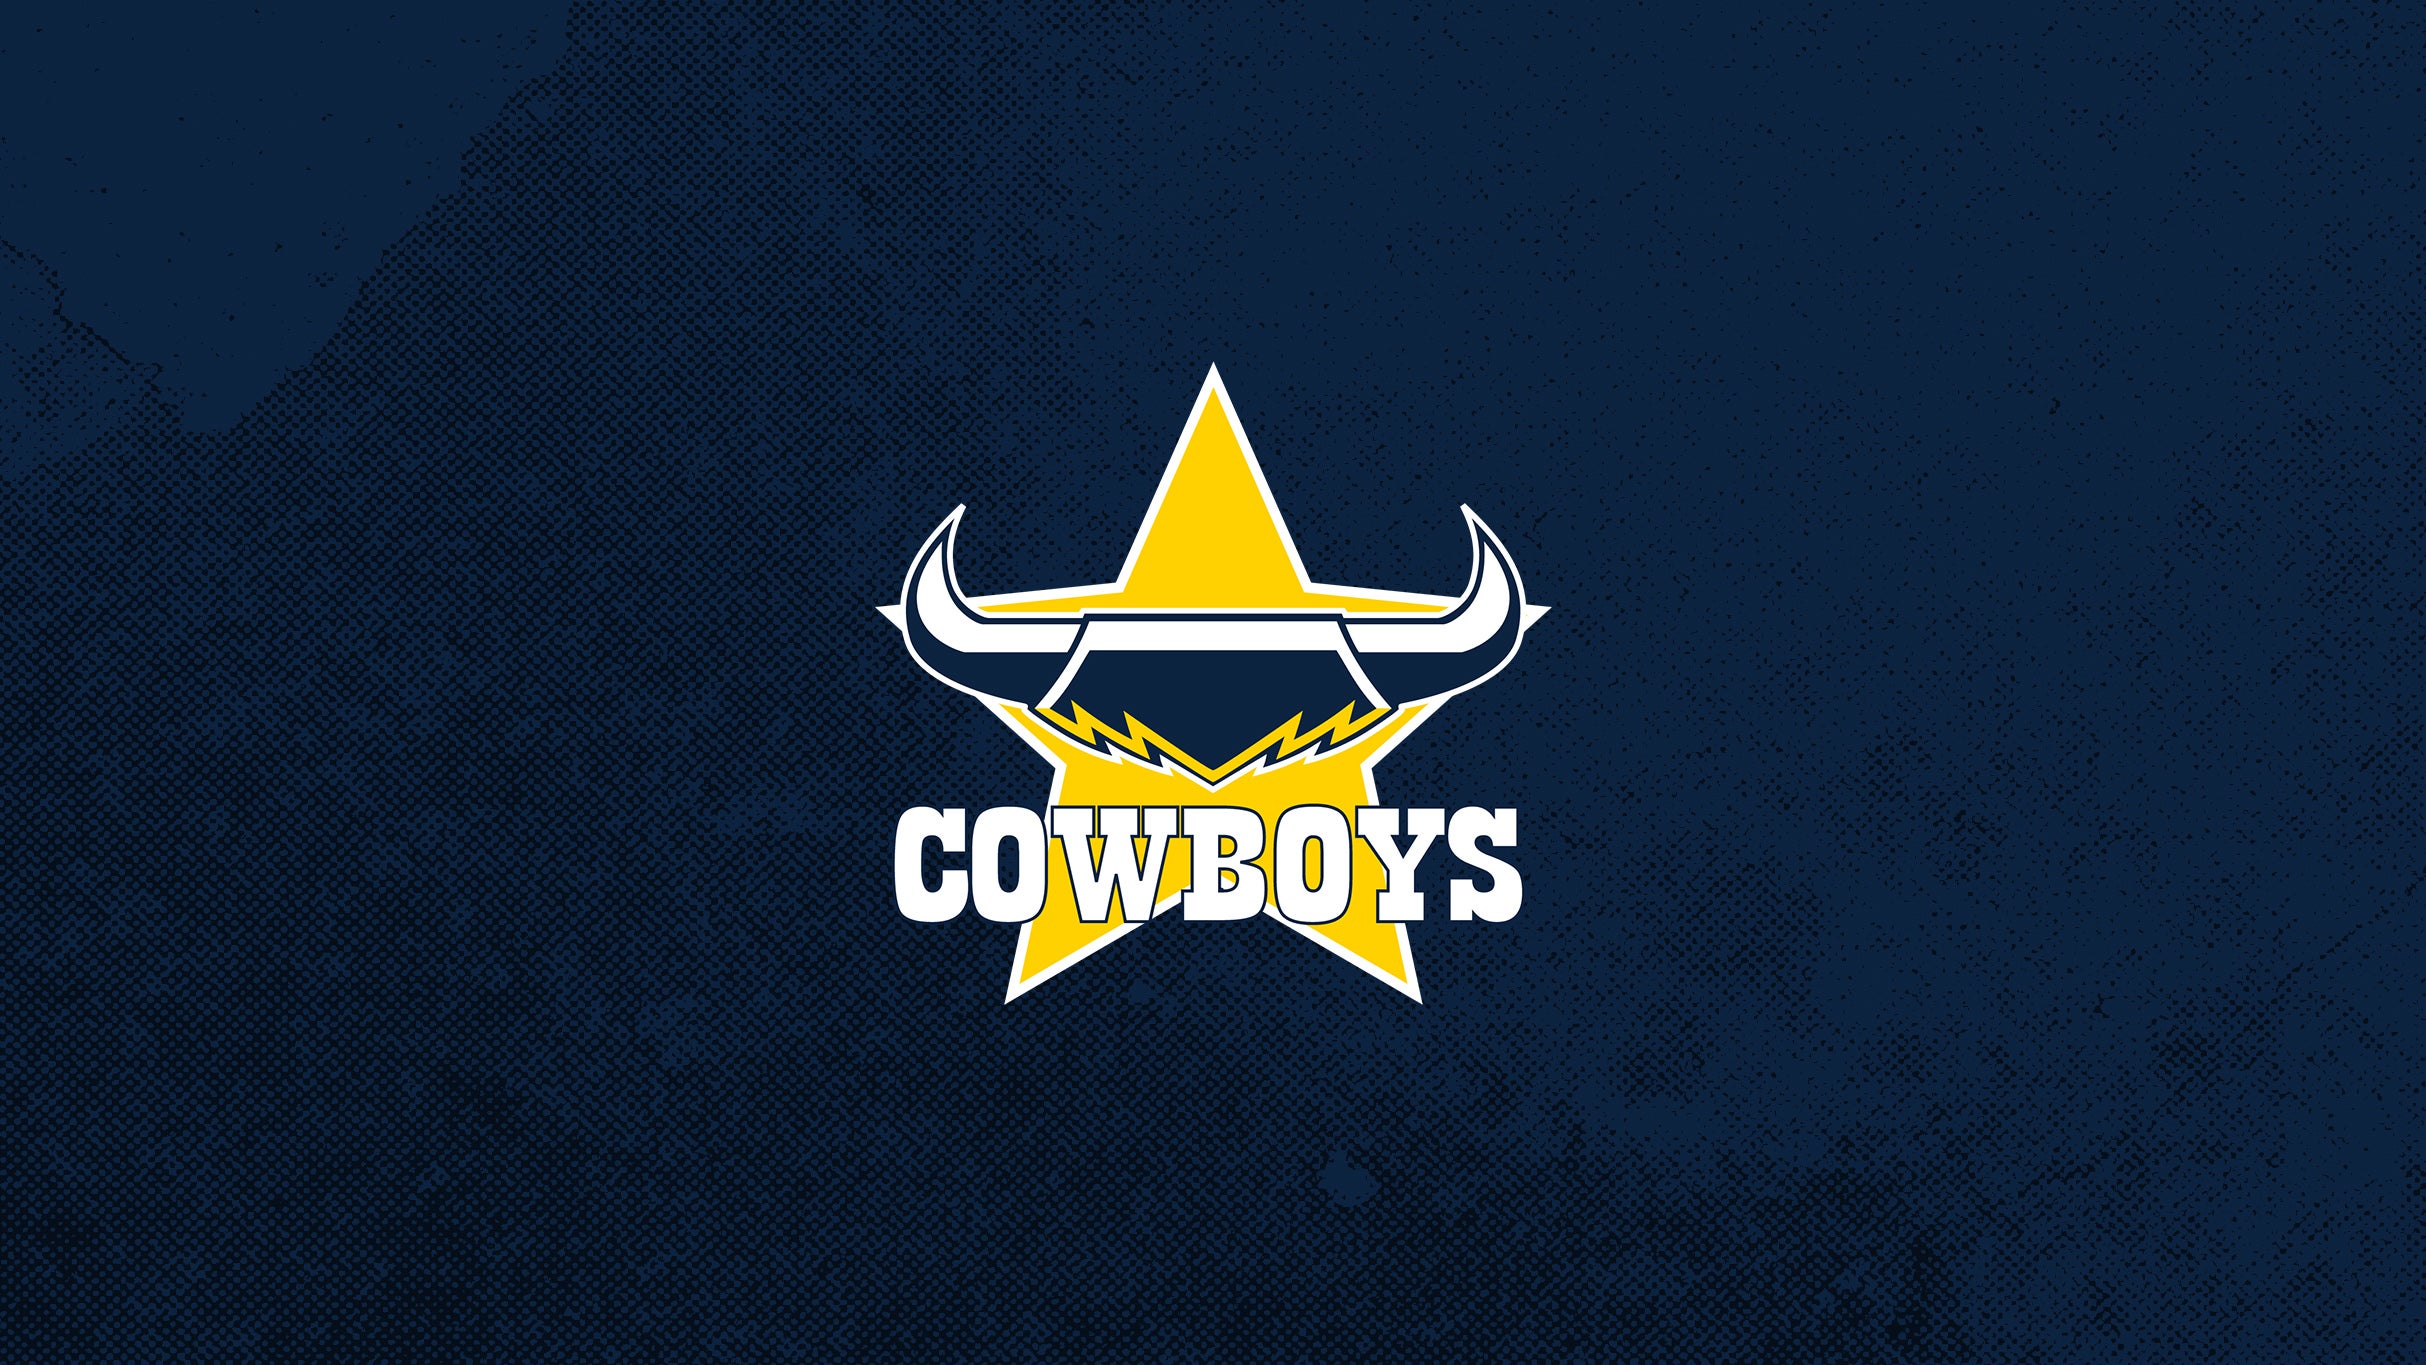 North Queensland Toyota Cowboys v Cronulla-Sutherland Sharks (Rnd 25) in Townsville promo photo for Council presale offer code